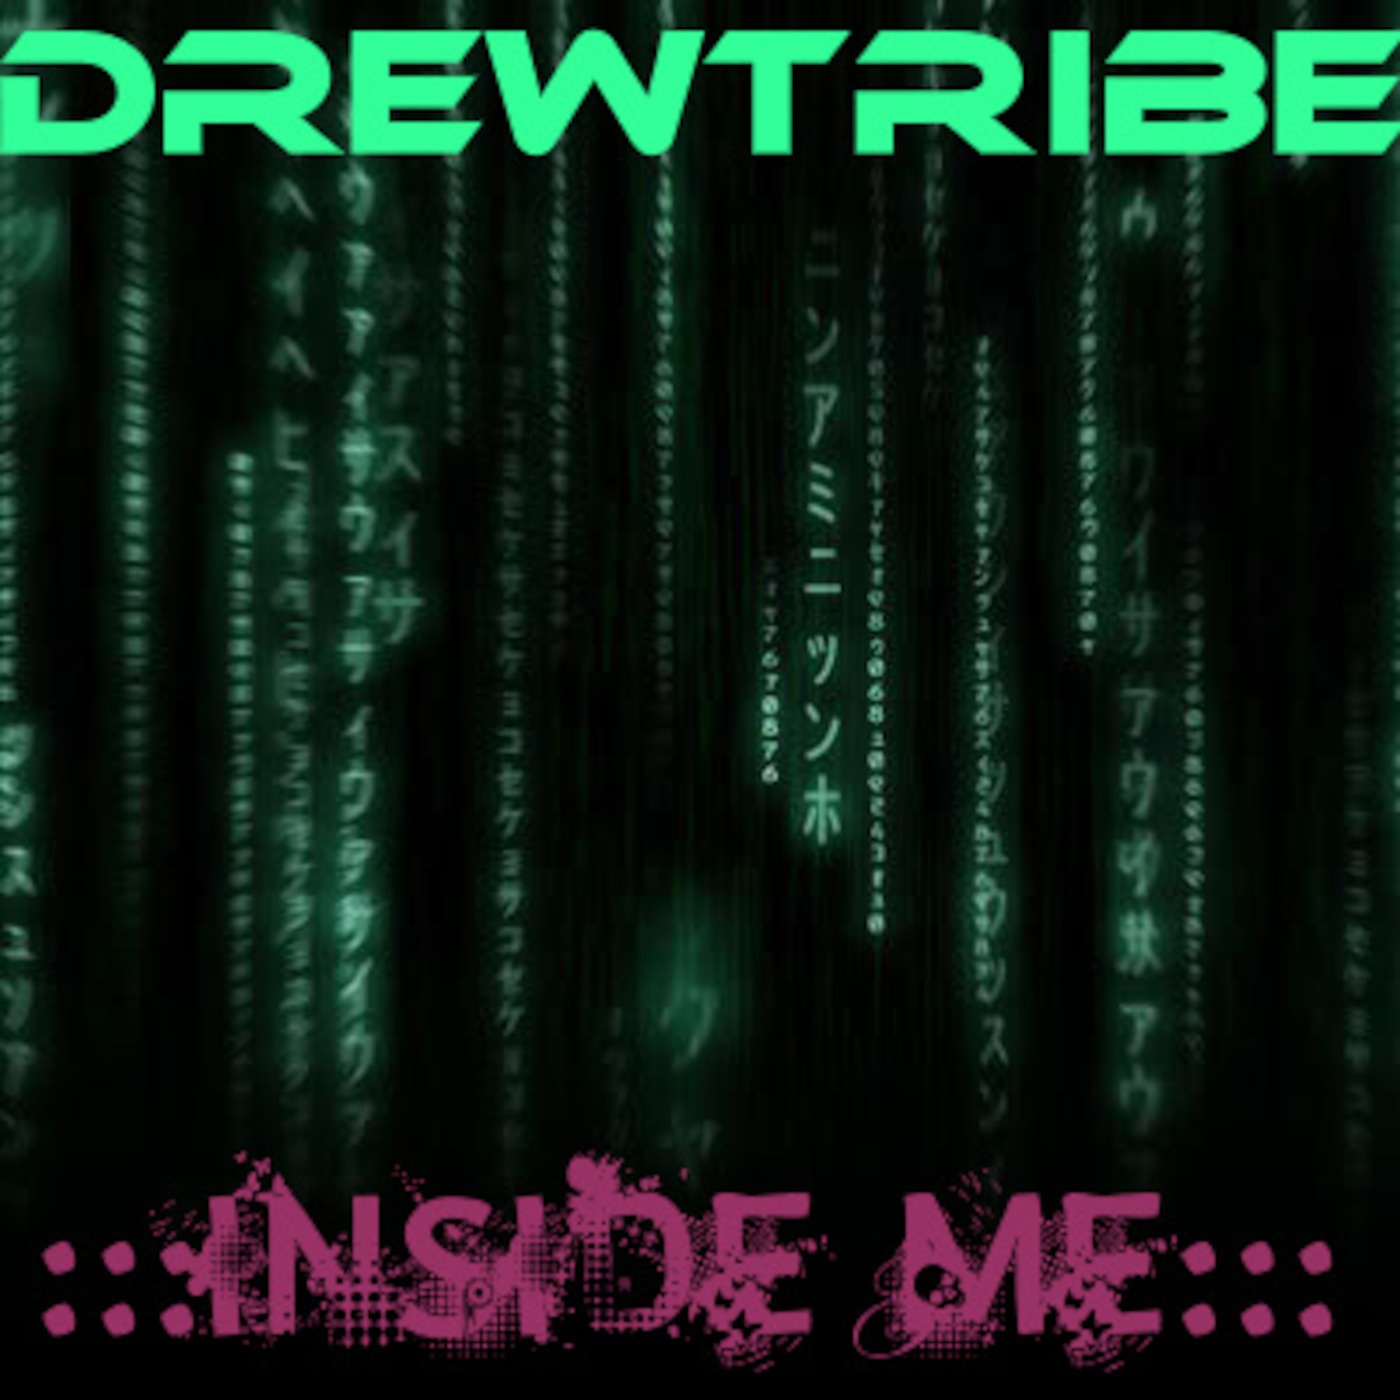 THE DREWTRIBE X-PERIENCE 22  (BLACK PARTY 2013)